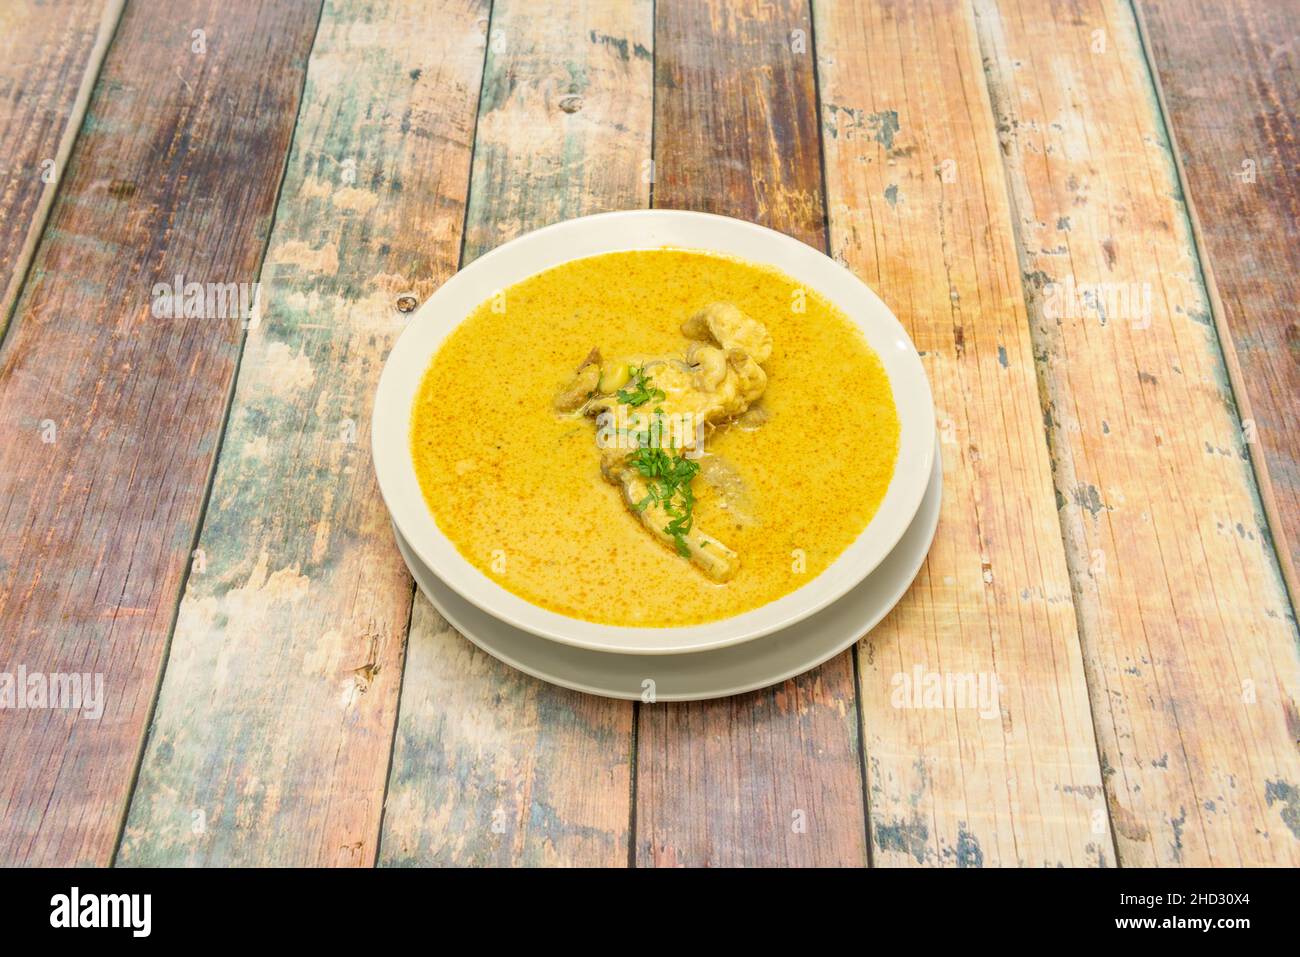 Sancocho is a stew made with tubers, vegetables, seasonings and fish Stock Photo